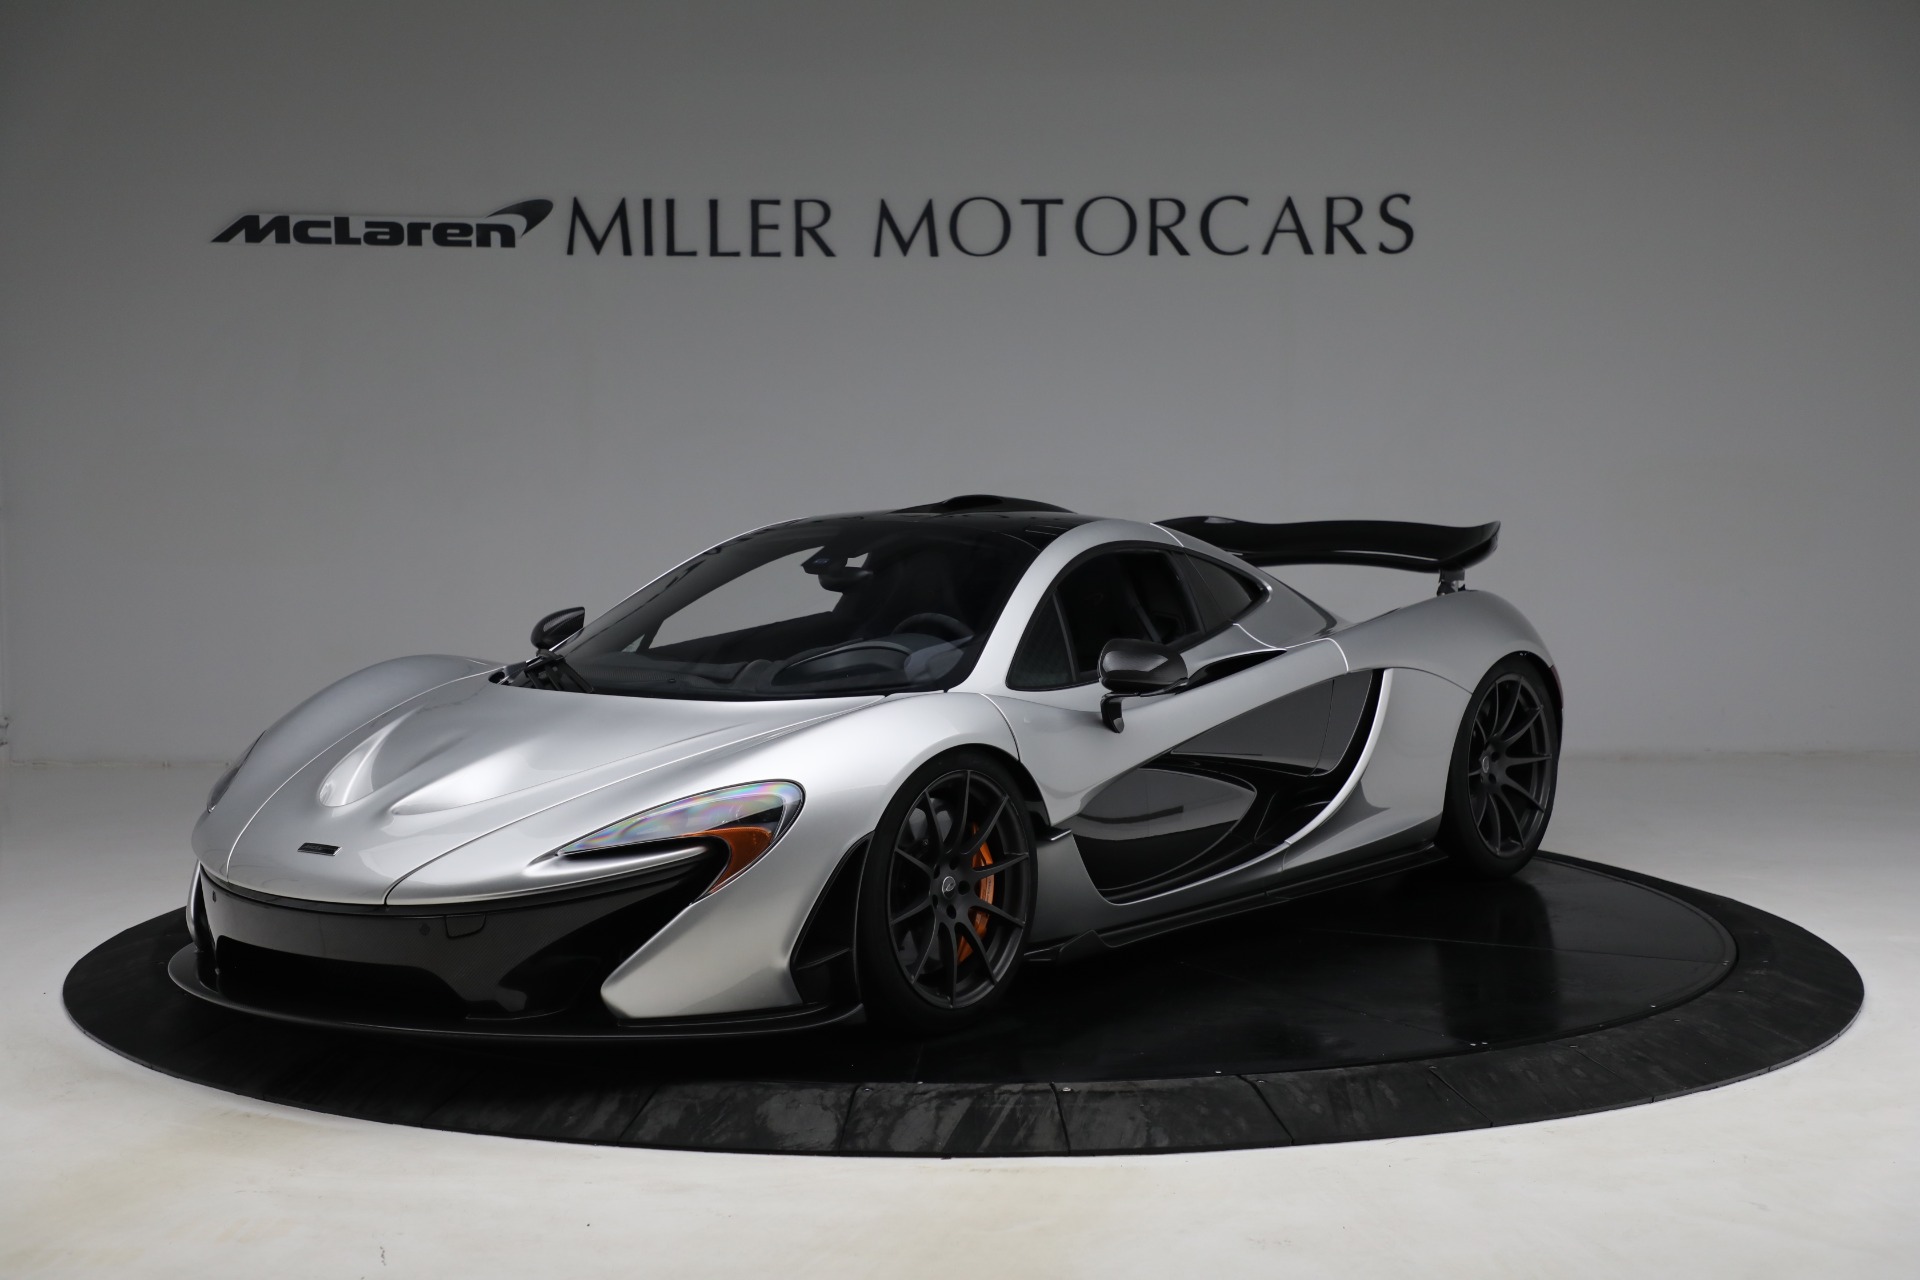 Used 2015 McLaren P1 for sale $1,795,000 at Rolls-Royce Motor Cars Greenwich in Greenwich CT 06830 1